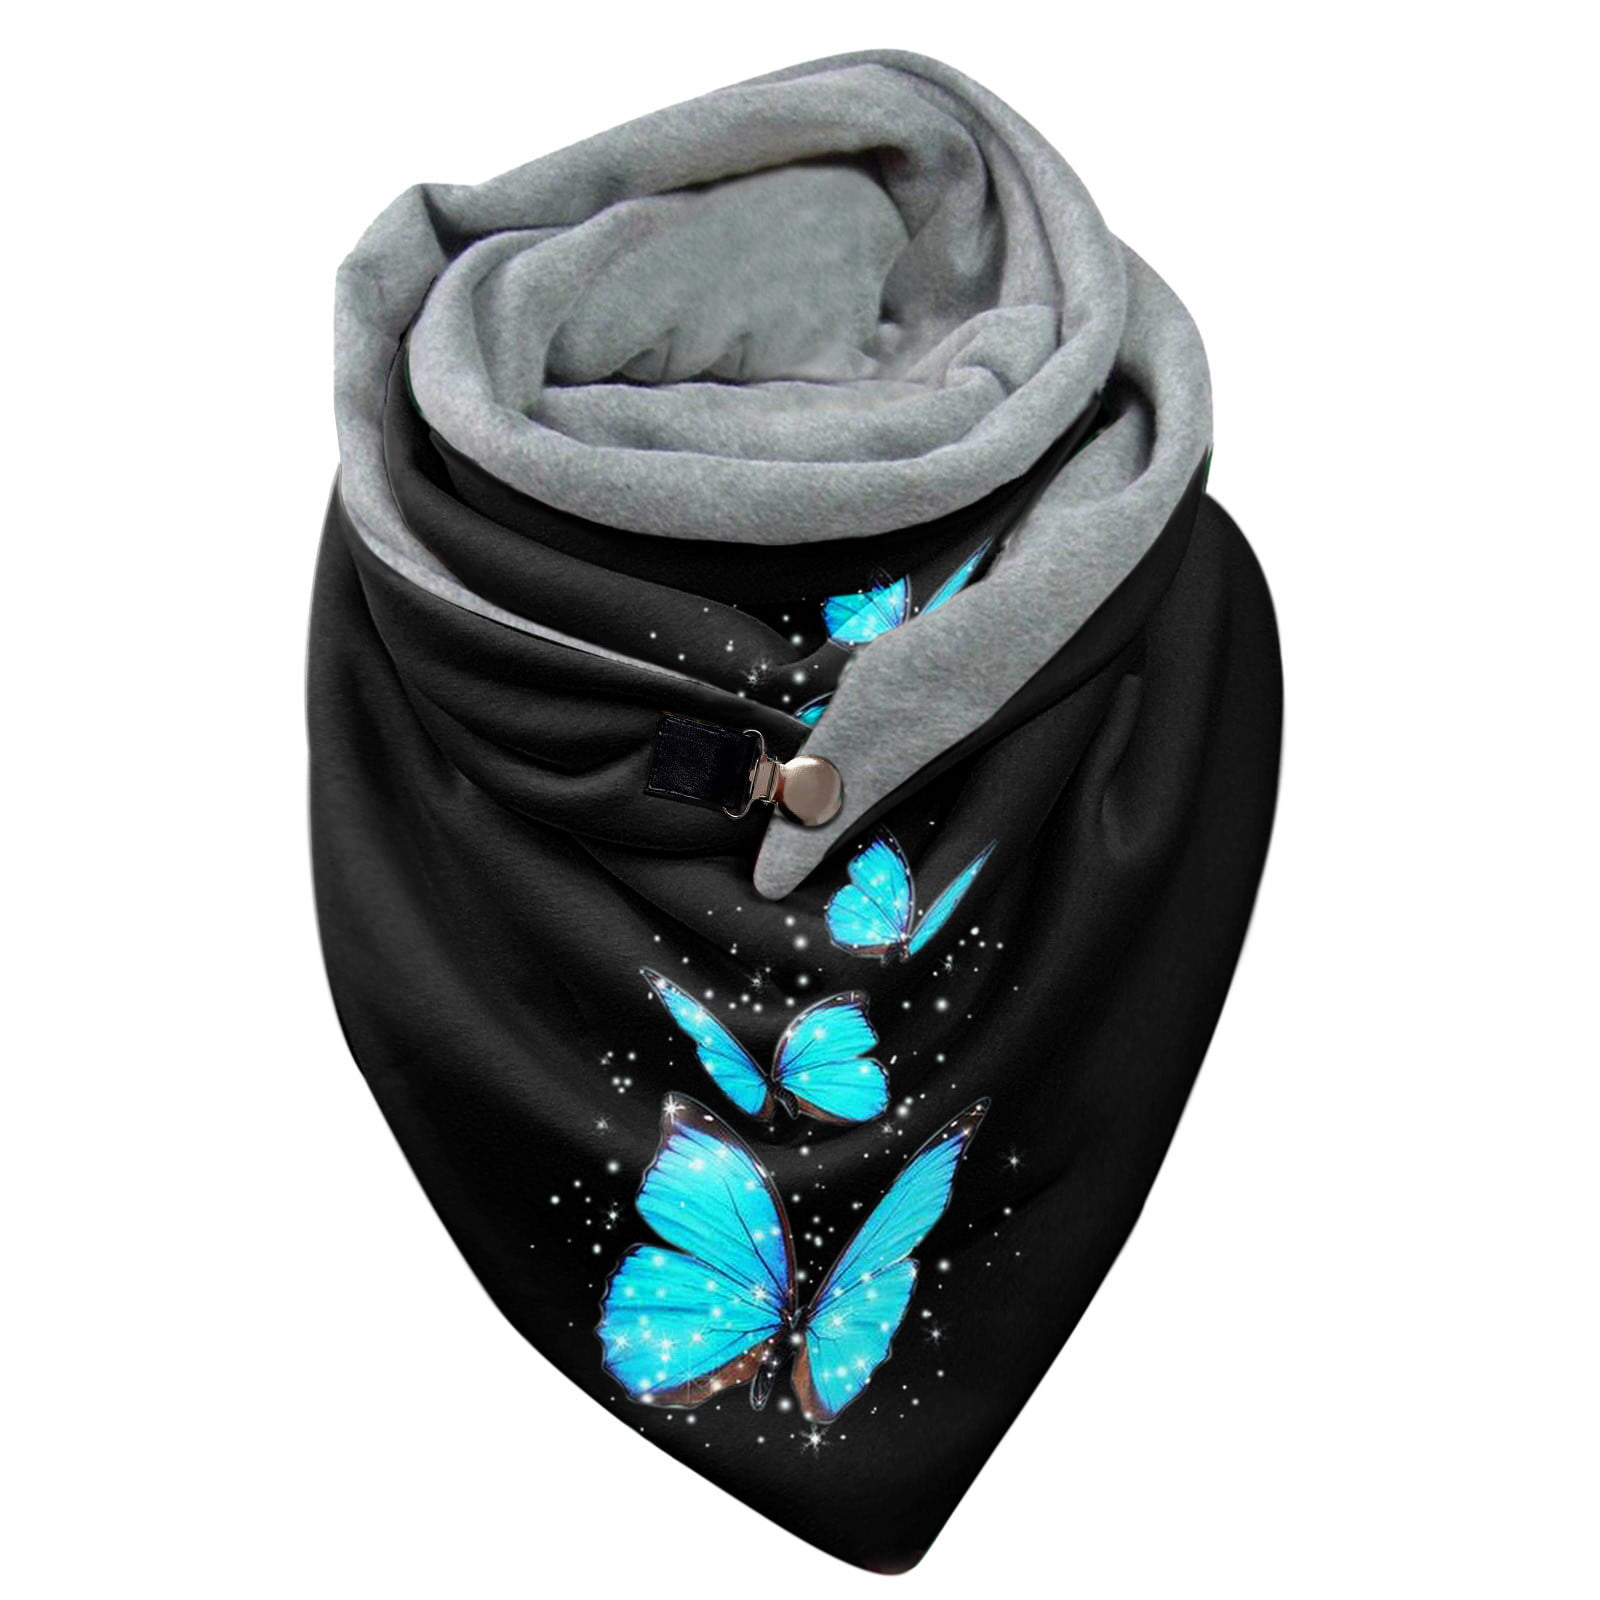 Animal Butterfly Print Fashion Scarf Wrap Chiffon Soft Large Light Finecy In 